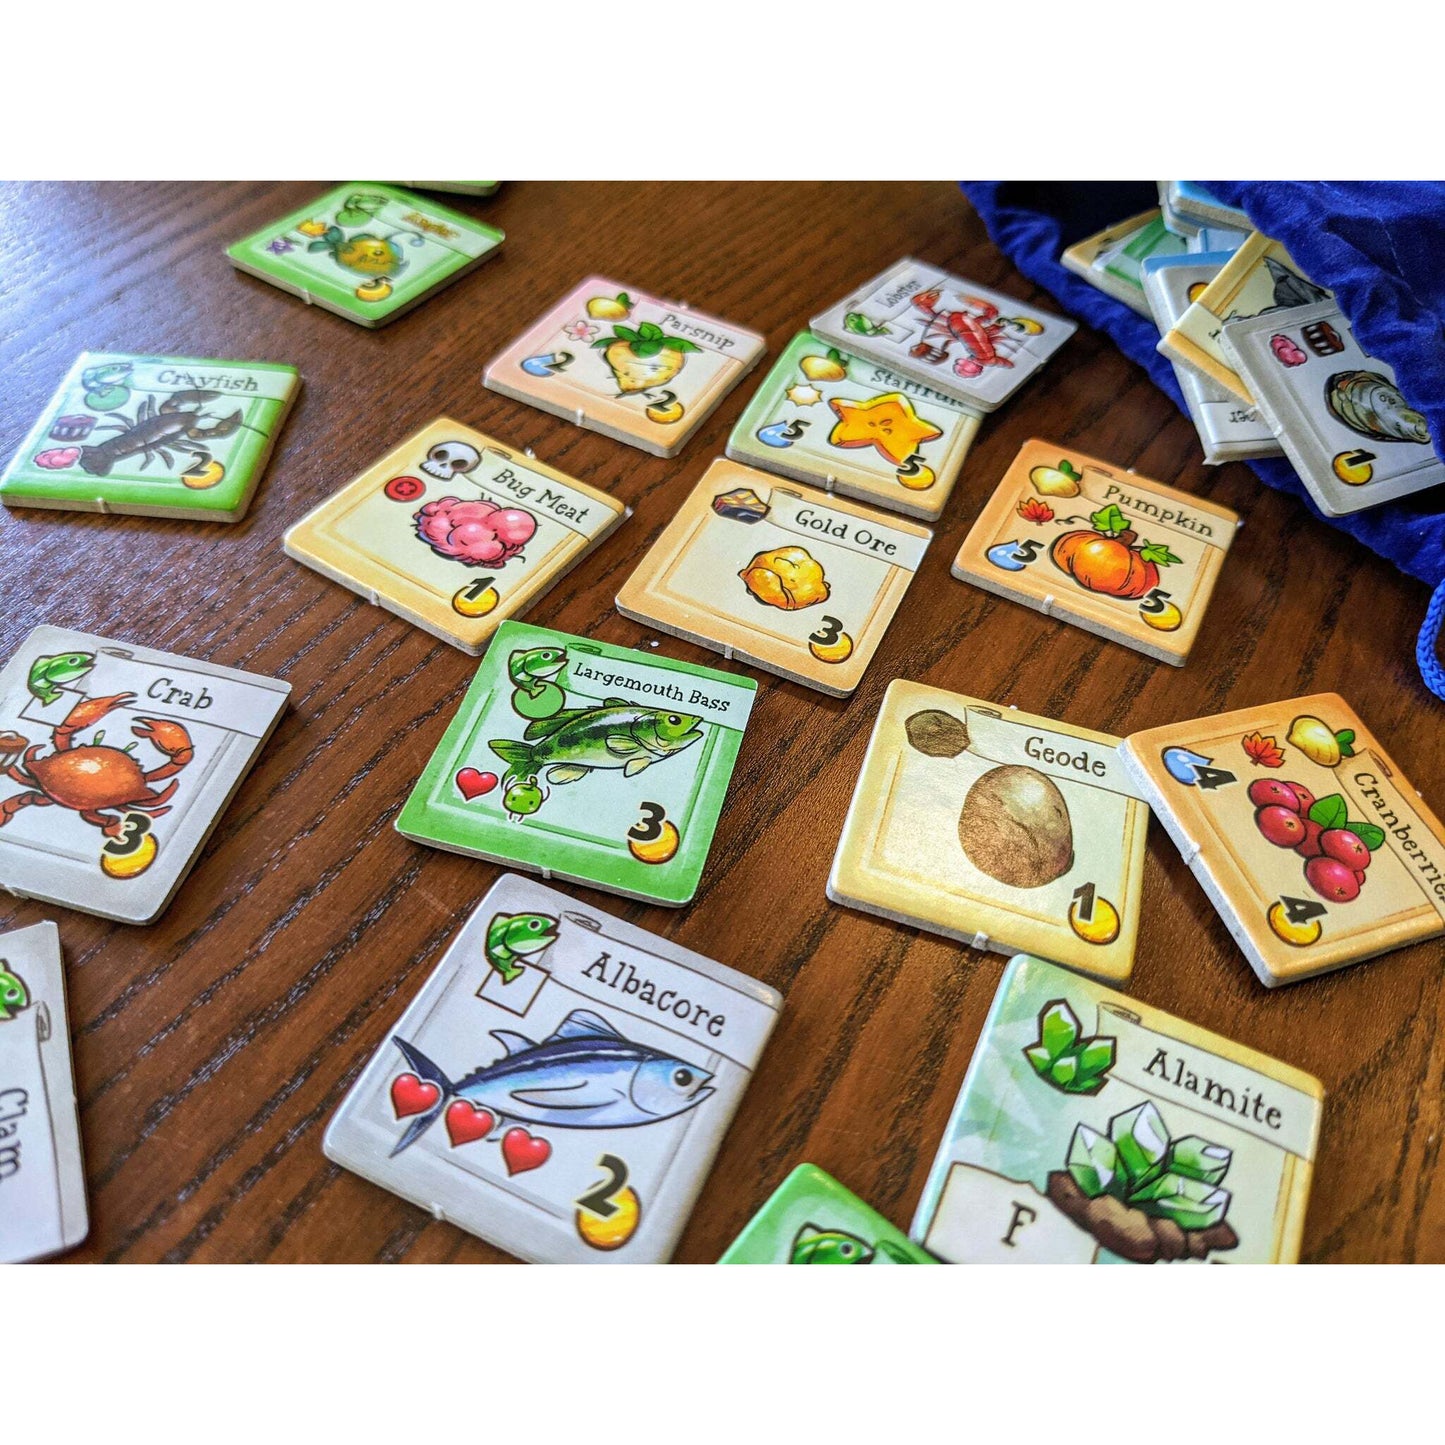 Stardew Valley Board Game Tile Cards